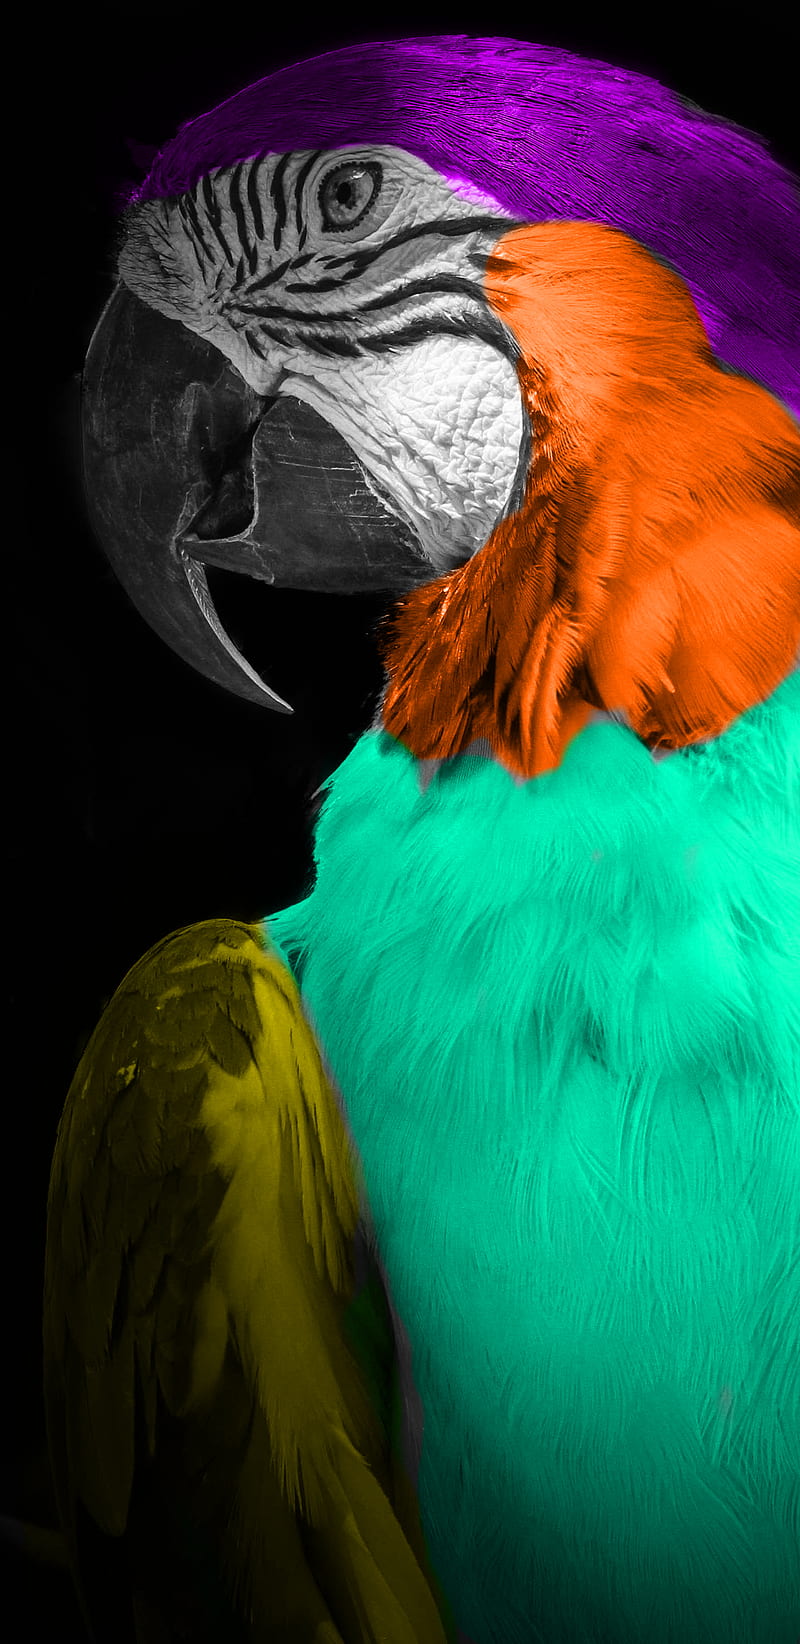 Magical MaCaw, bird, colorful, elusive, fancy, parrot, pet, pirate, sing, song, talkative, HD phone wallpaper